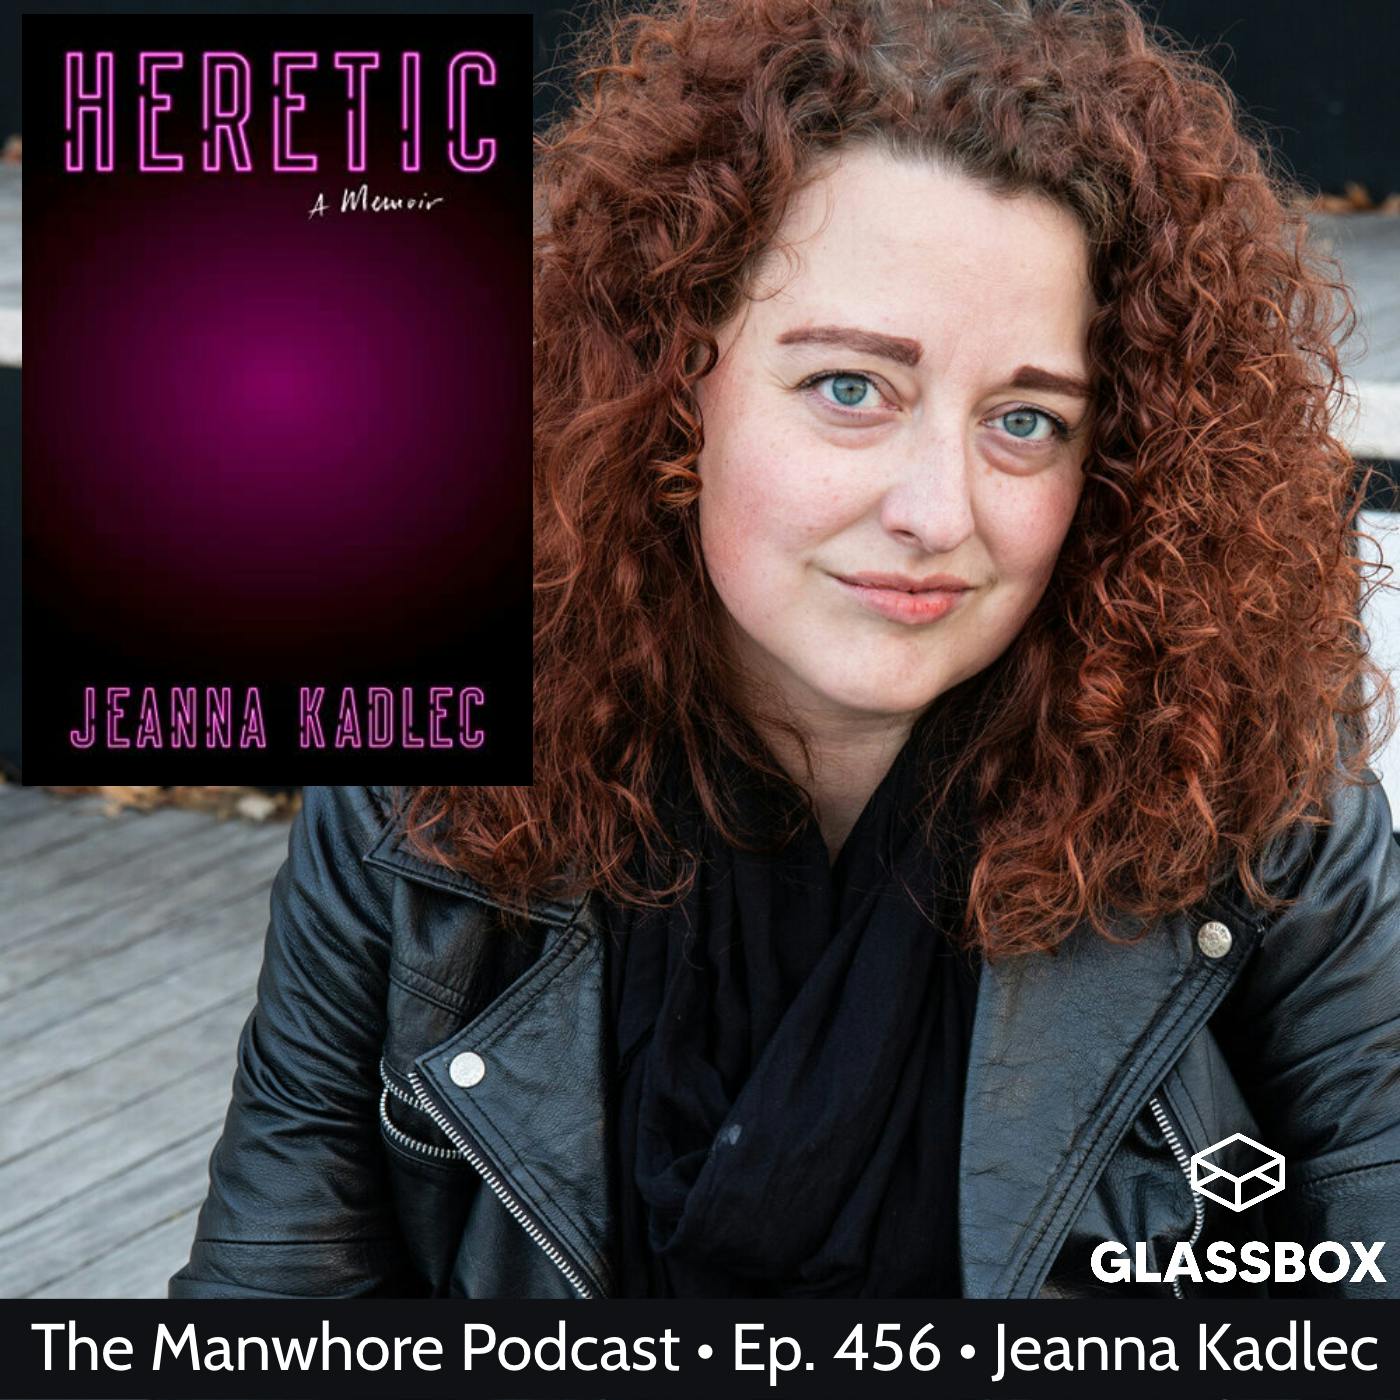 The Manwhore Podcast: A Sex-Positive Quest - Ep. 456: Evangelical Cults and Wedding Night Panic Attacks with Jeanna Kadlec